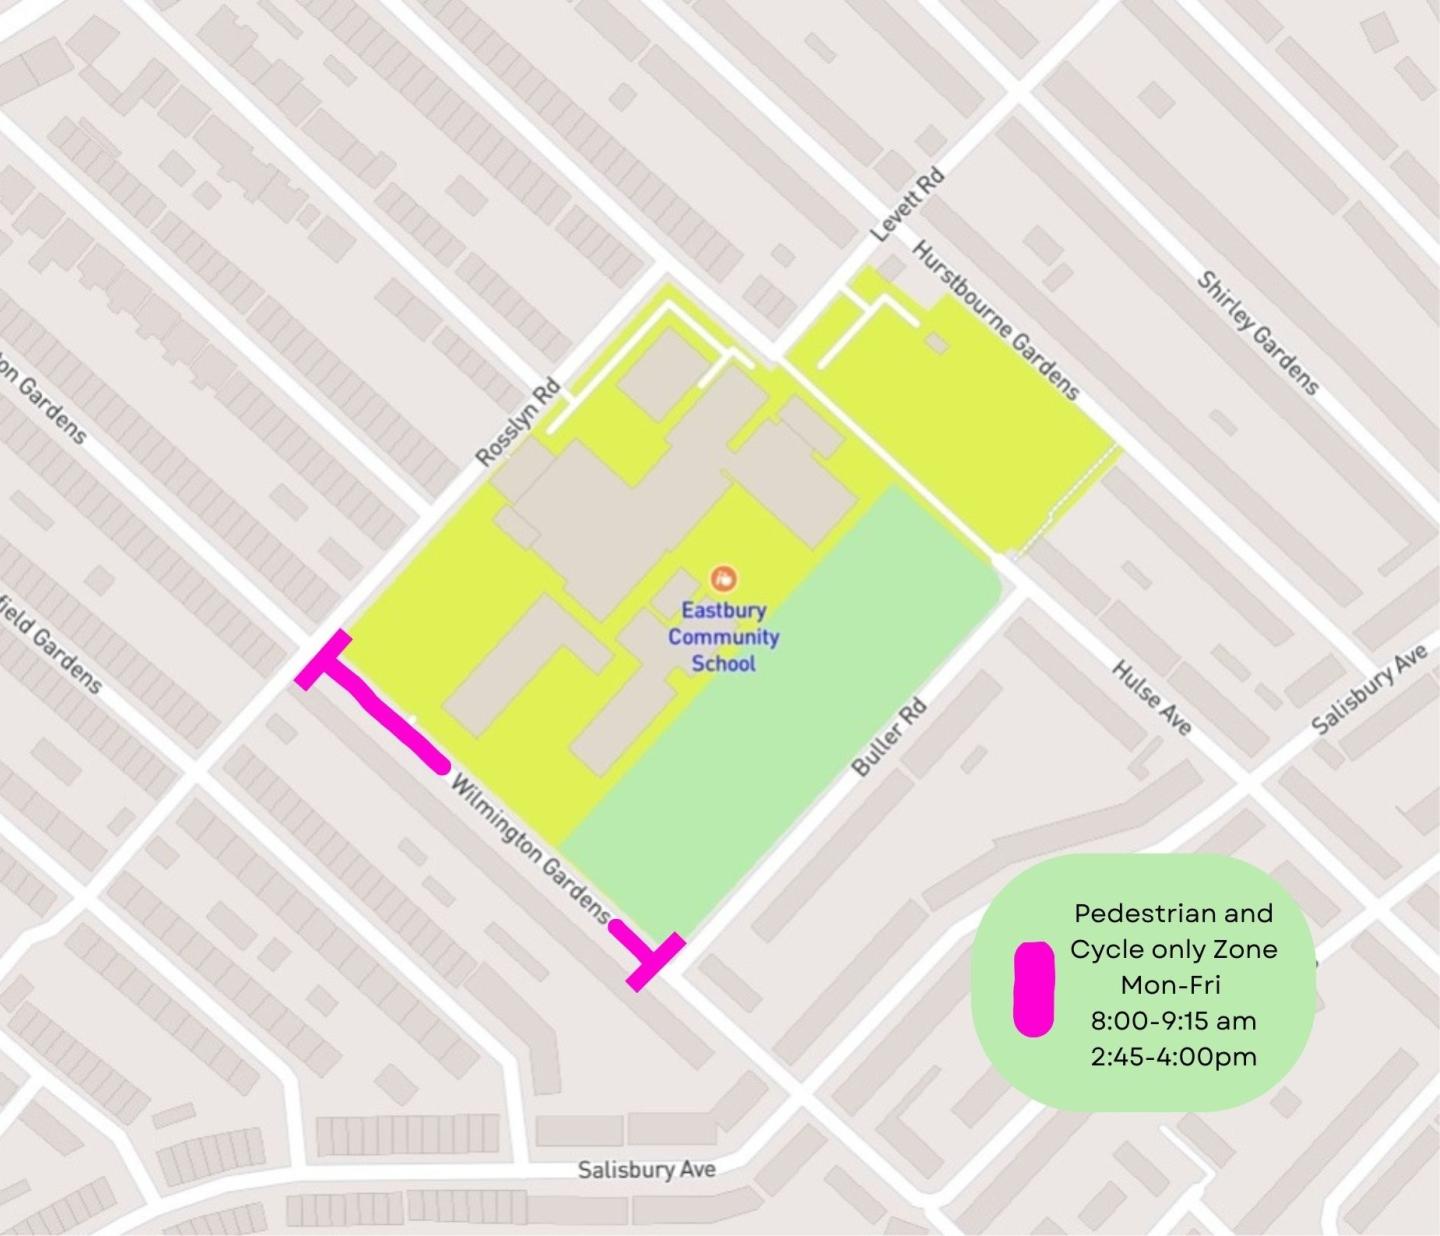 A map showing the location of the School Street for Eastbury Community School